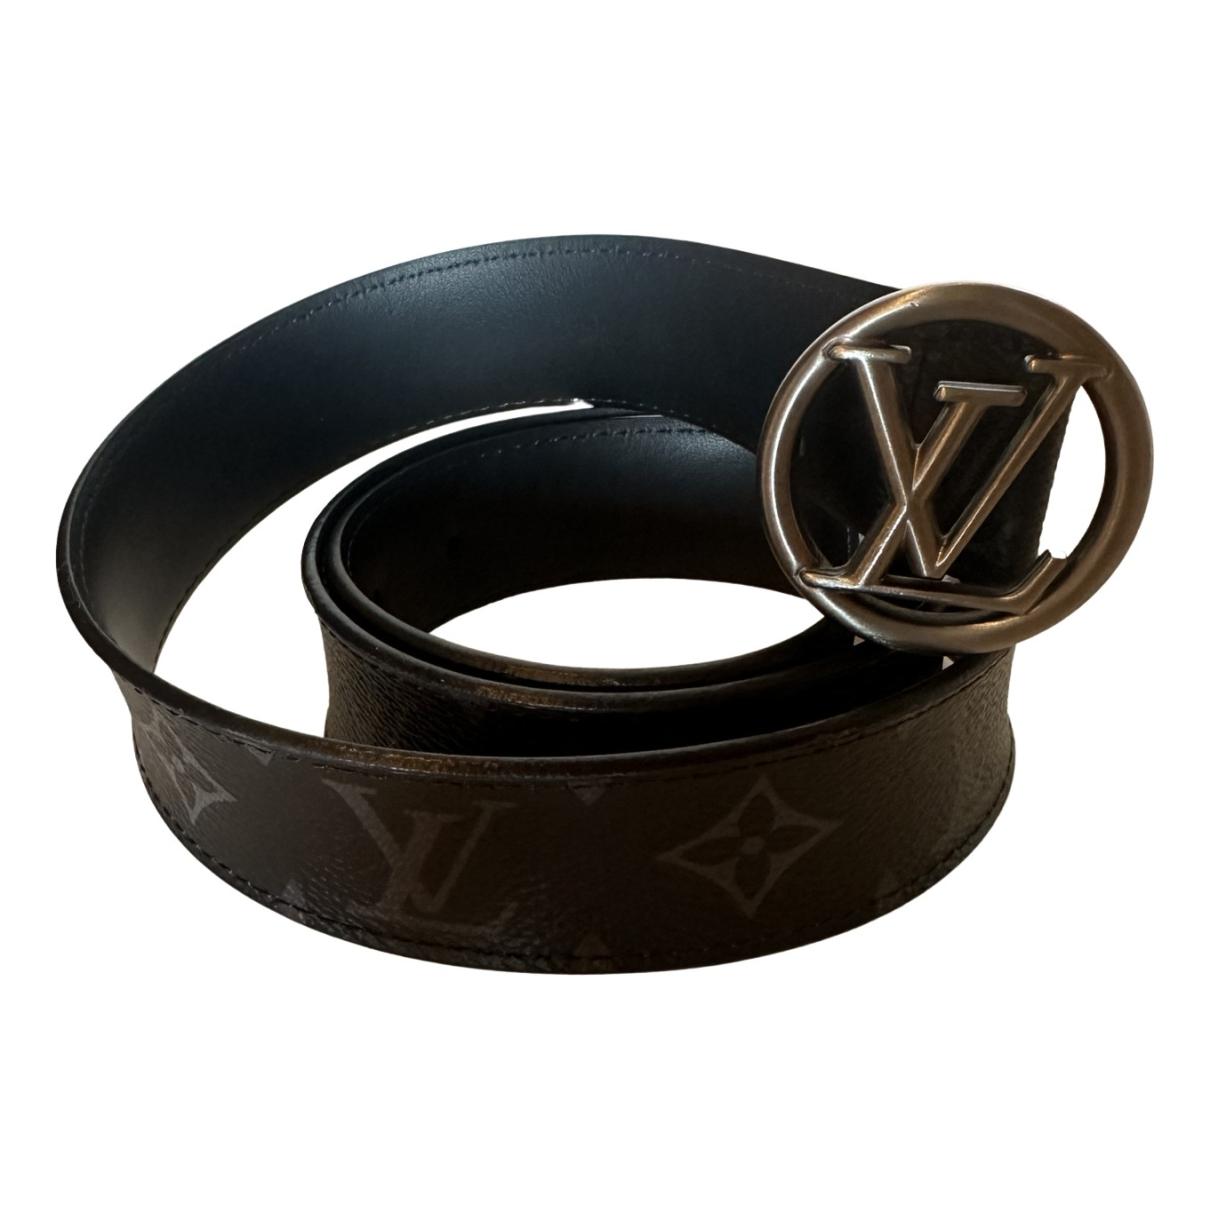 Initiales leather belt Louis Vuitton Black size 95 cm in Leather - 32941503